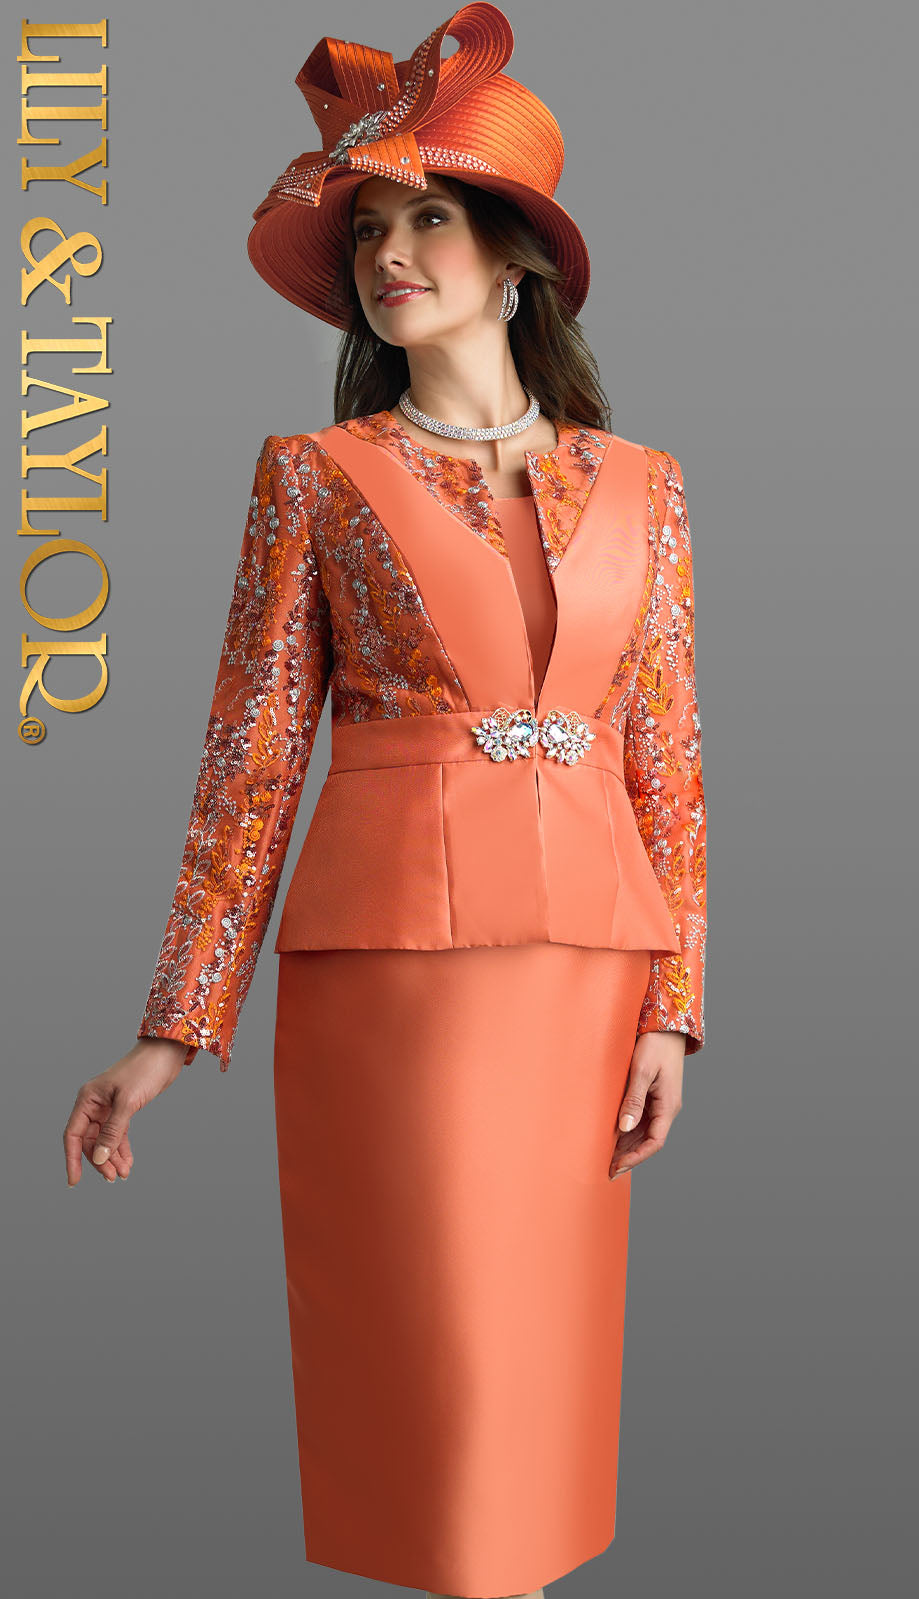 Lily And Taylor 4776-QS Ladies Church Suit